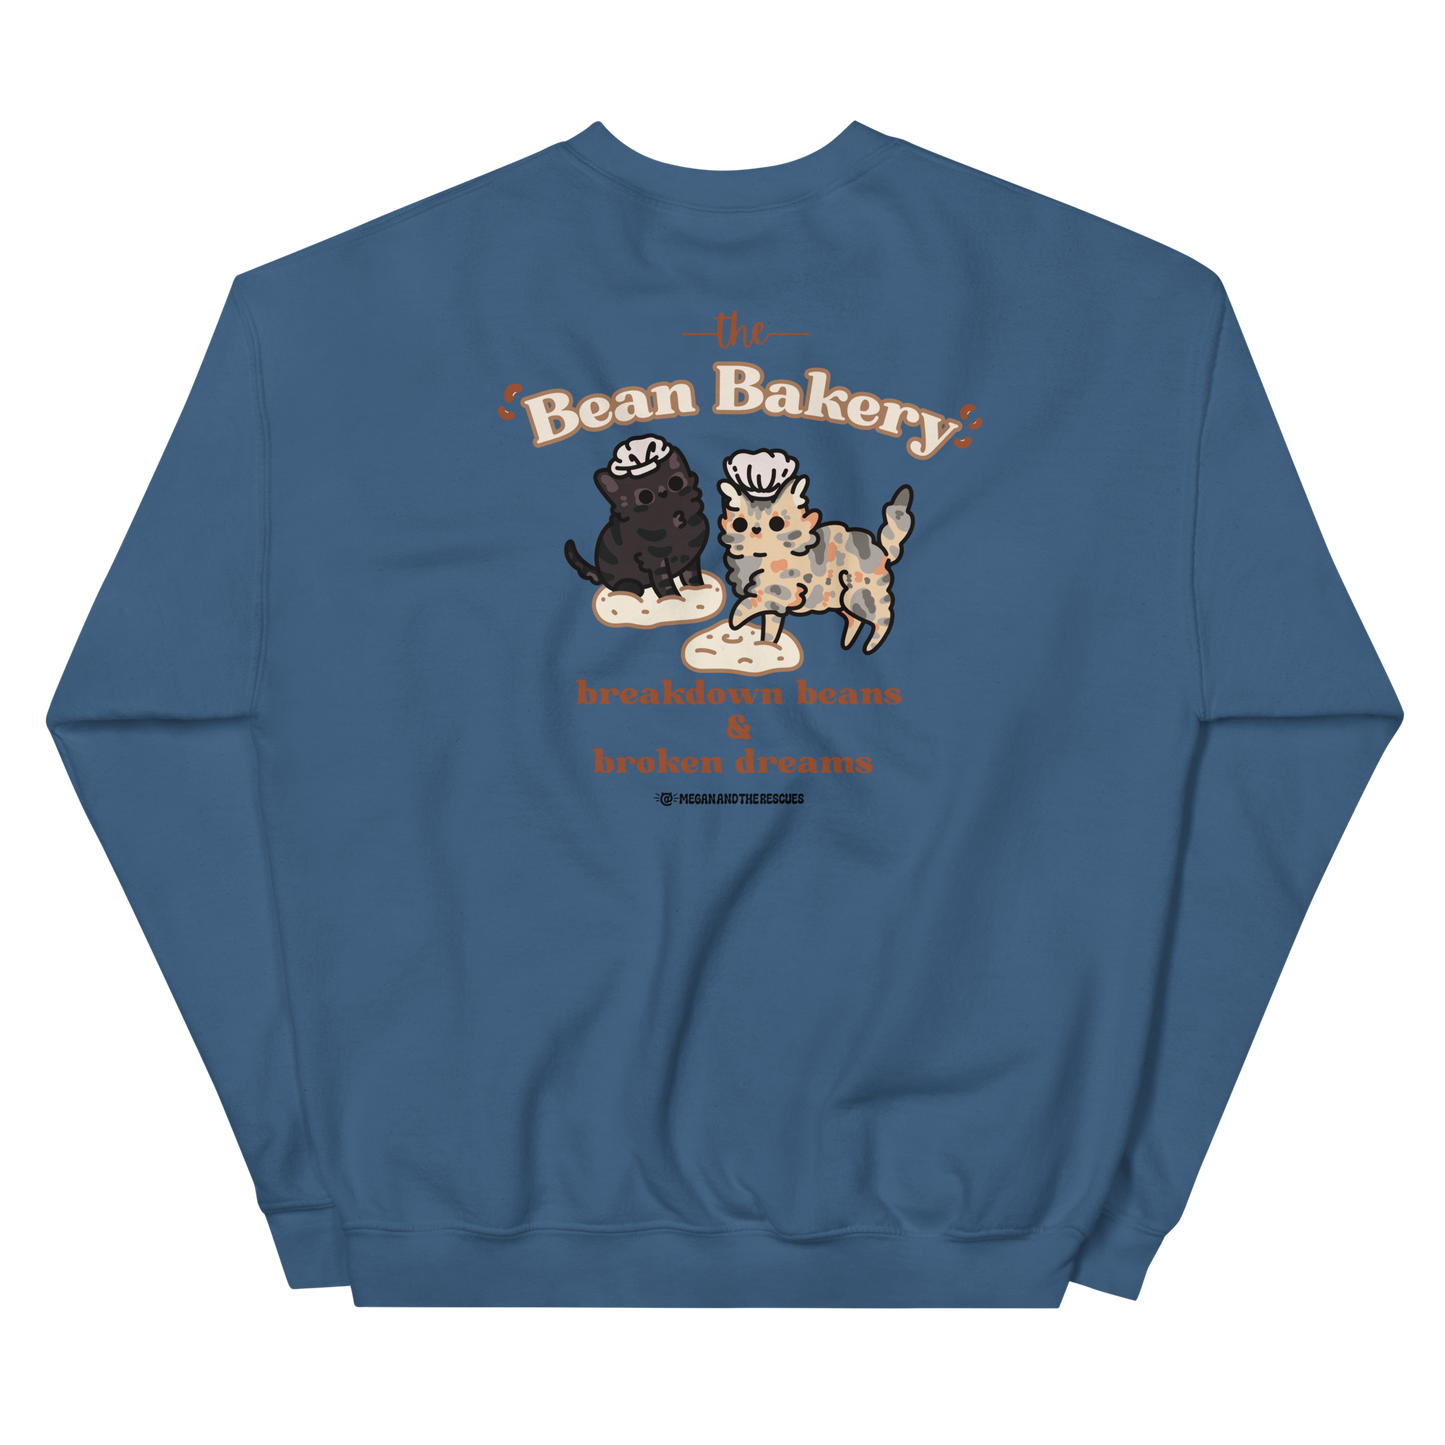 The Bean Bakery (Version 2) - front and back print - Unisex Sweatshirt